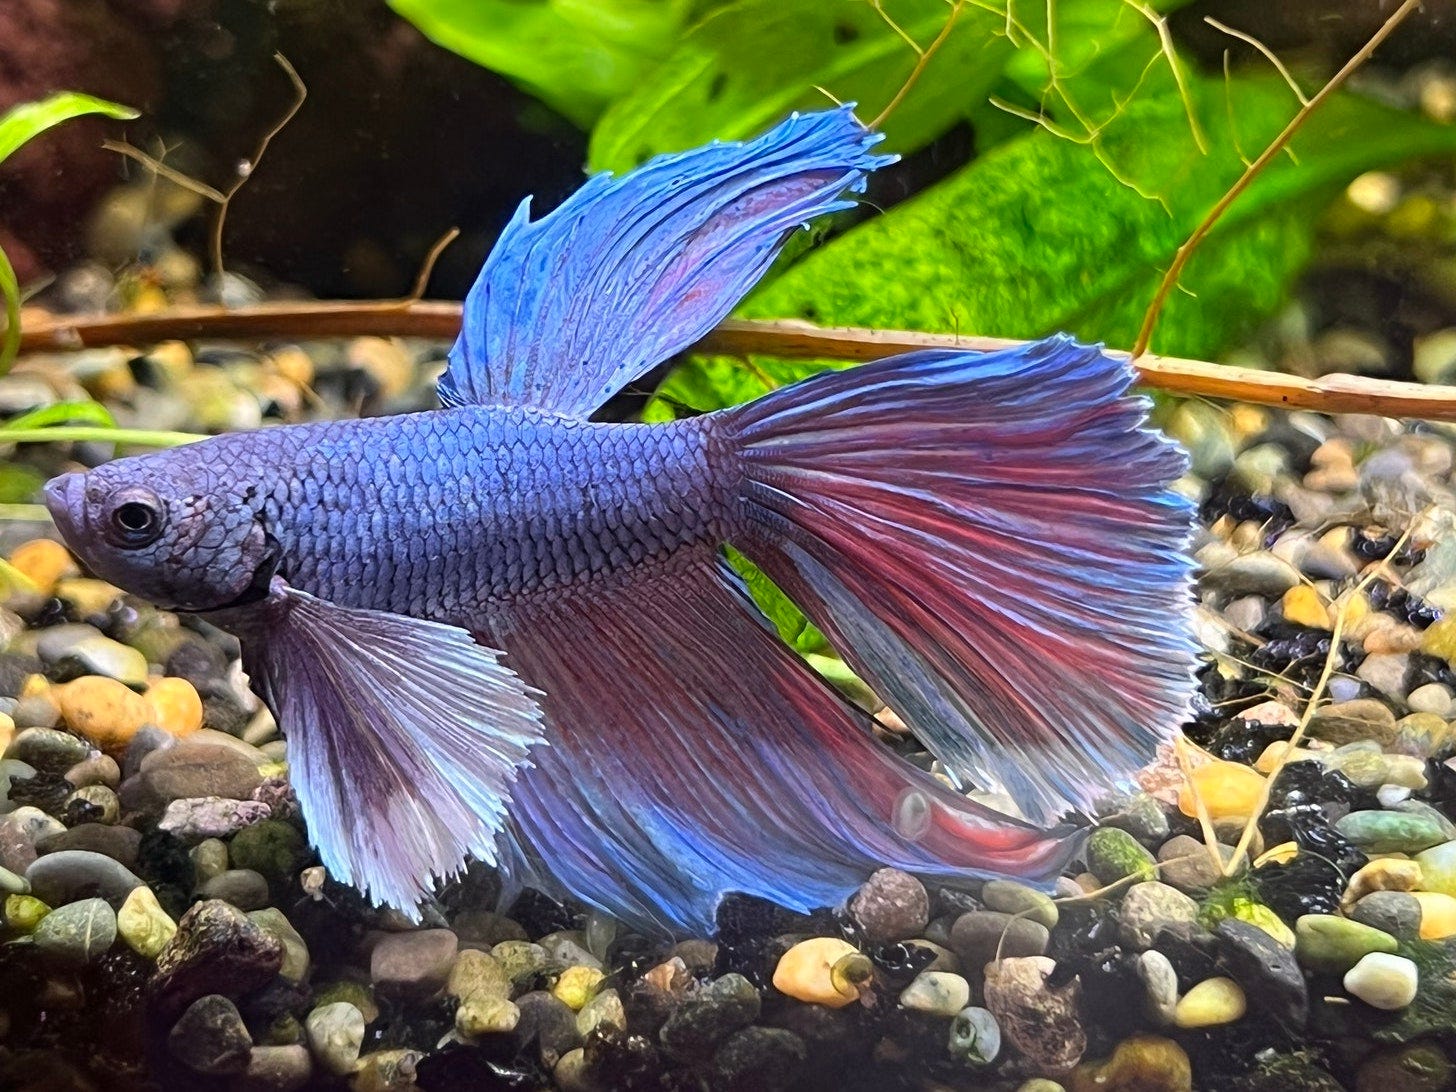 A photo of a blue and red fighting fish in a tank